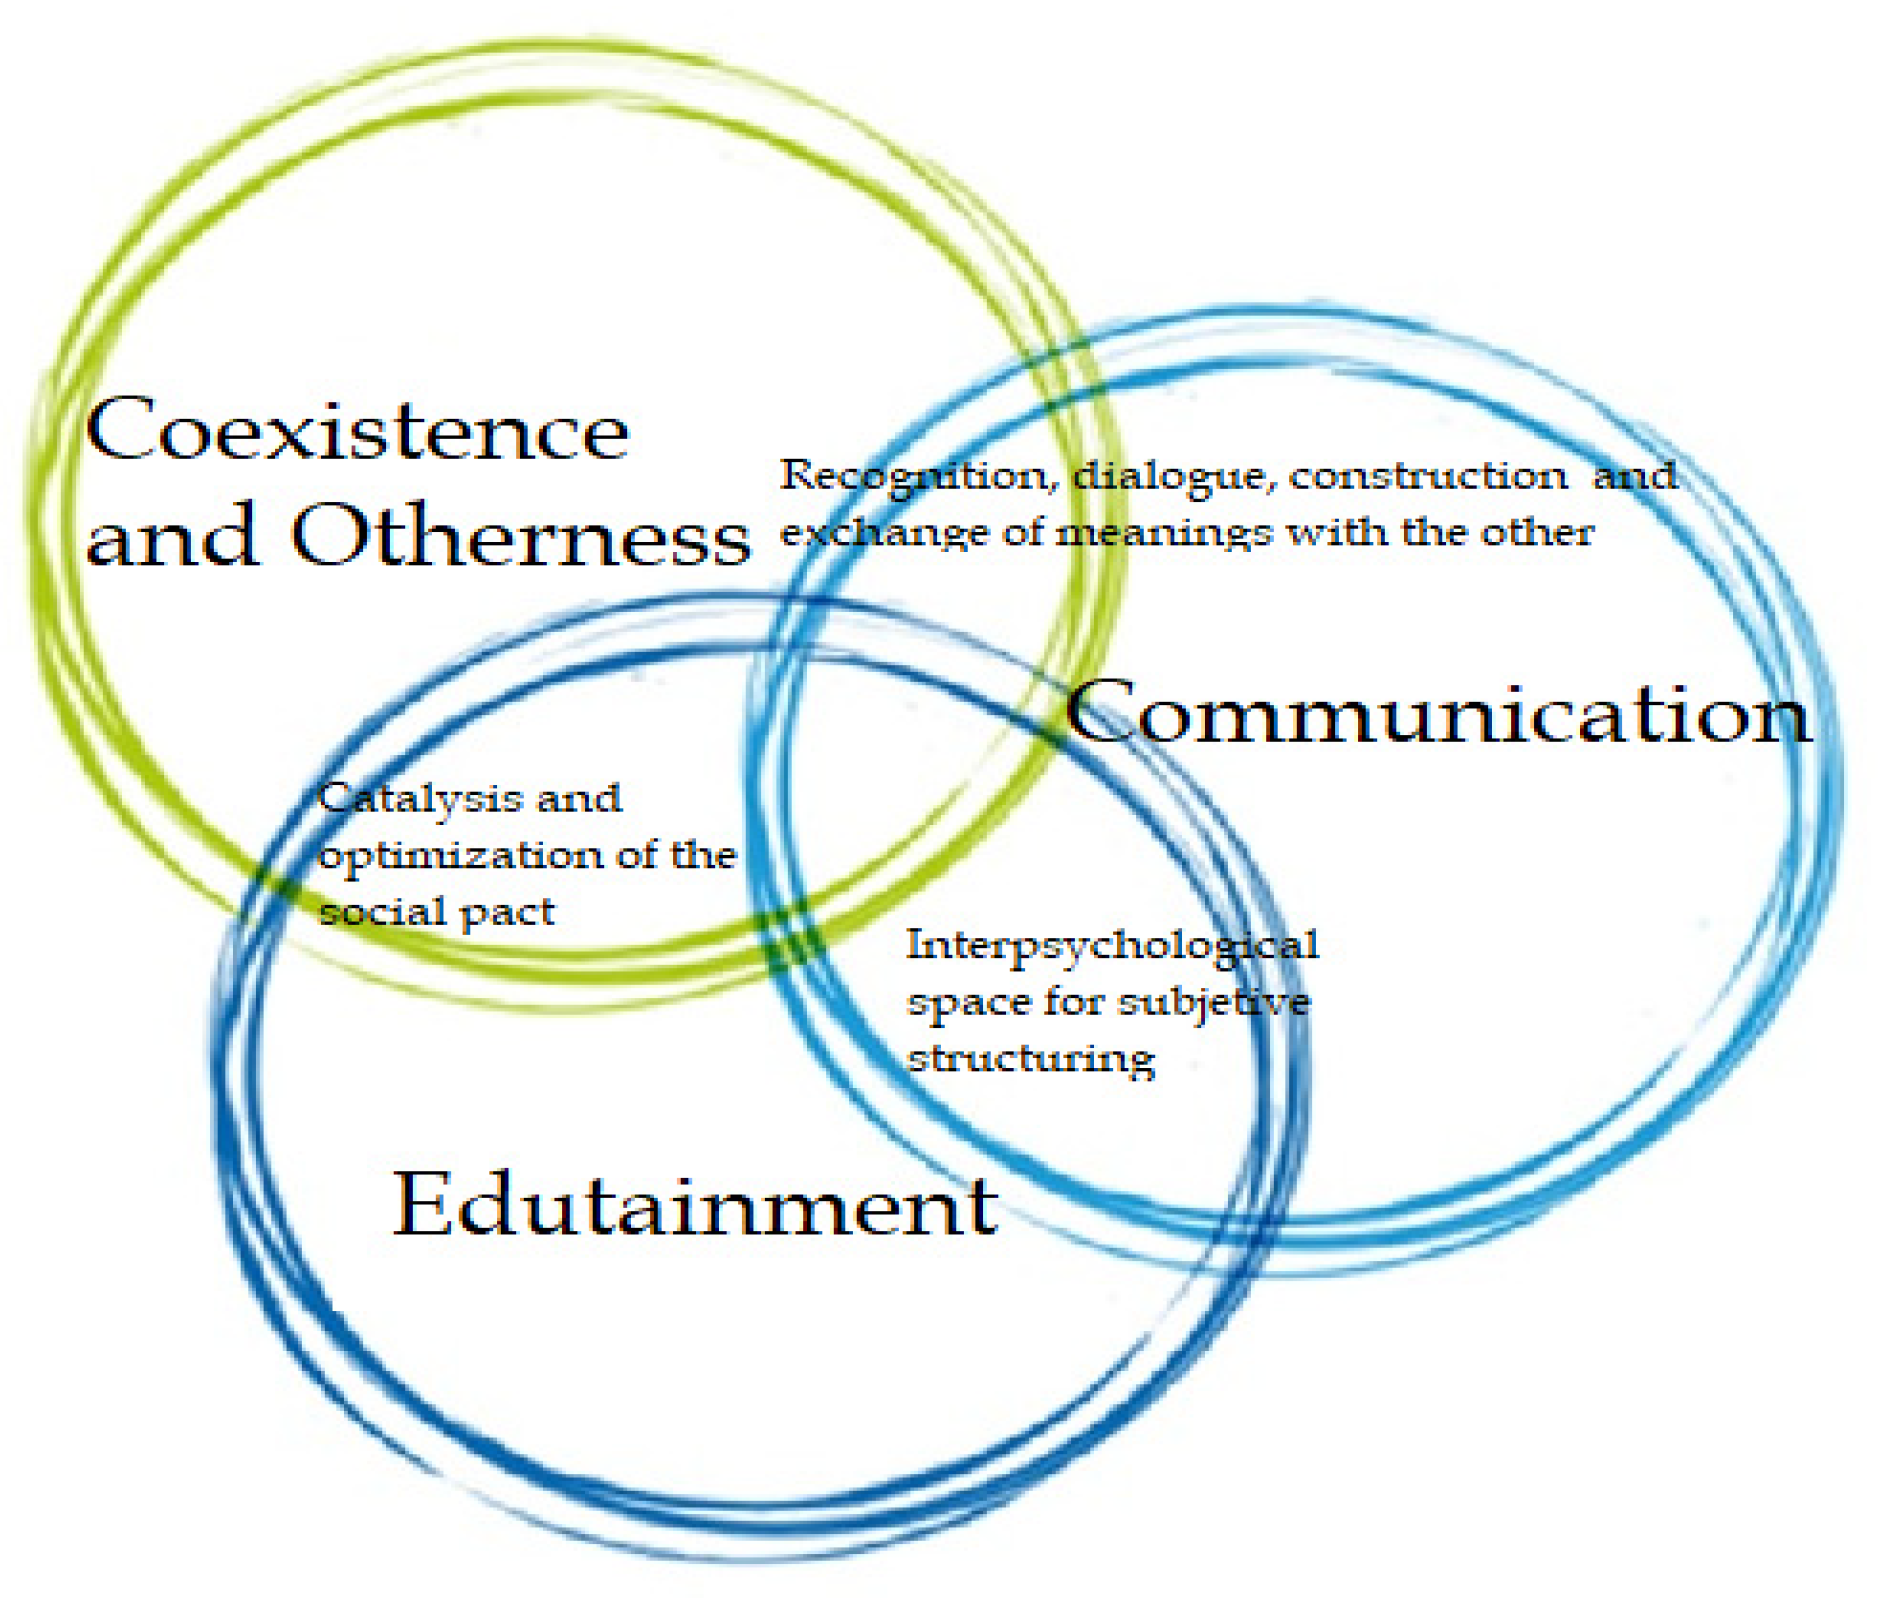 Social Sciences Free Full-Text 2.0 Society Convergences Coexistence, Otherness, Communication and Edutainment Xxx Photo